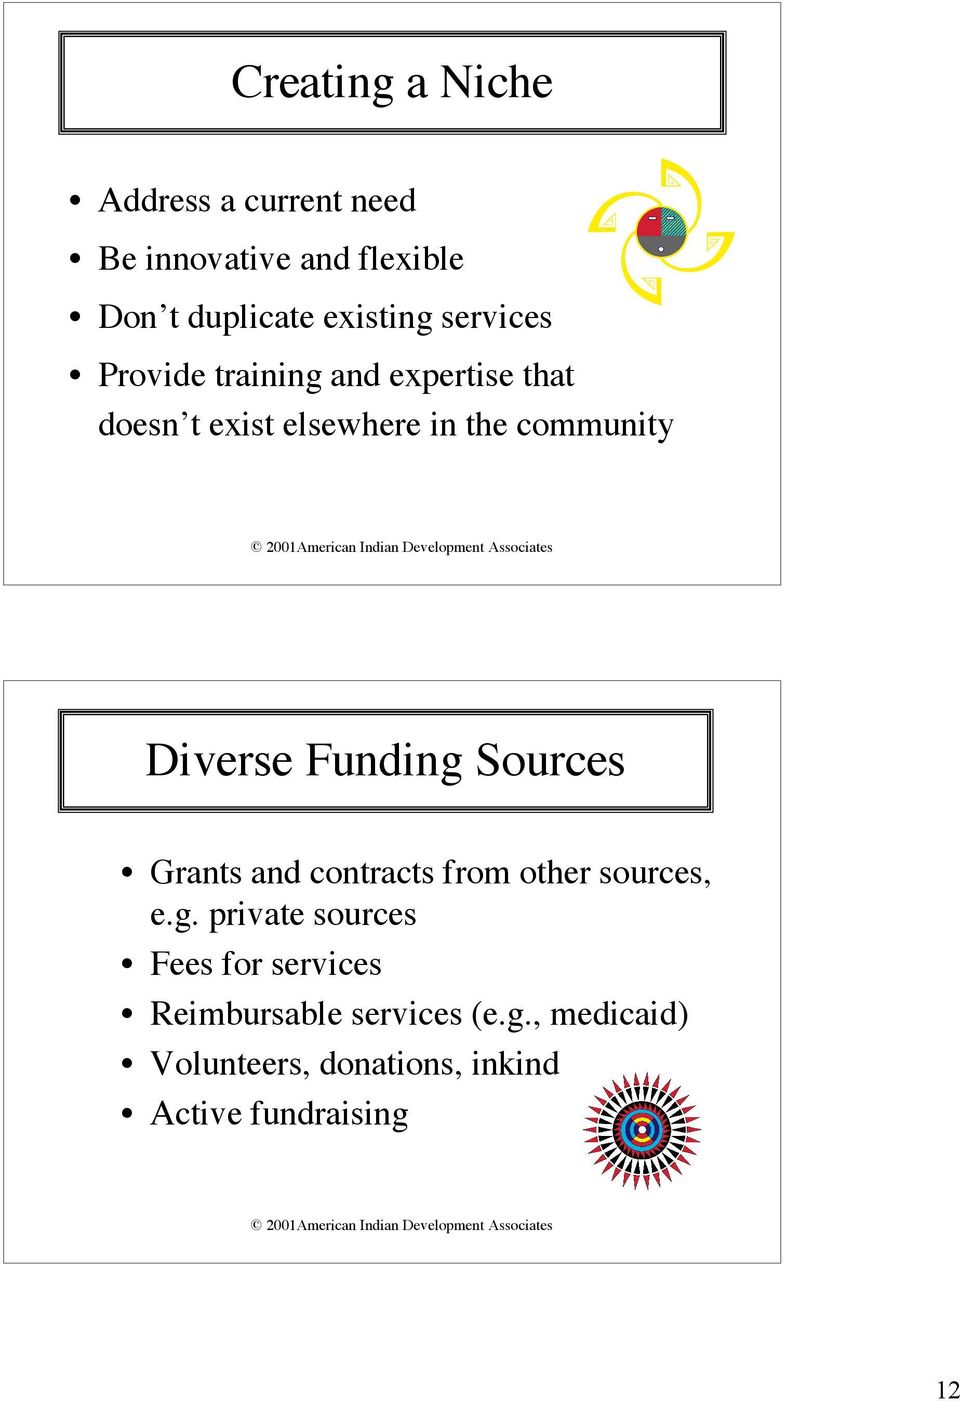 Diverse Funding Sources Grants and contracts from other sources, e.g. private sources Fees for services Reimbursable services (e.